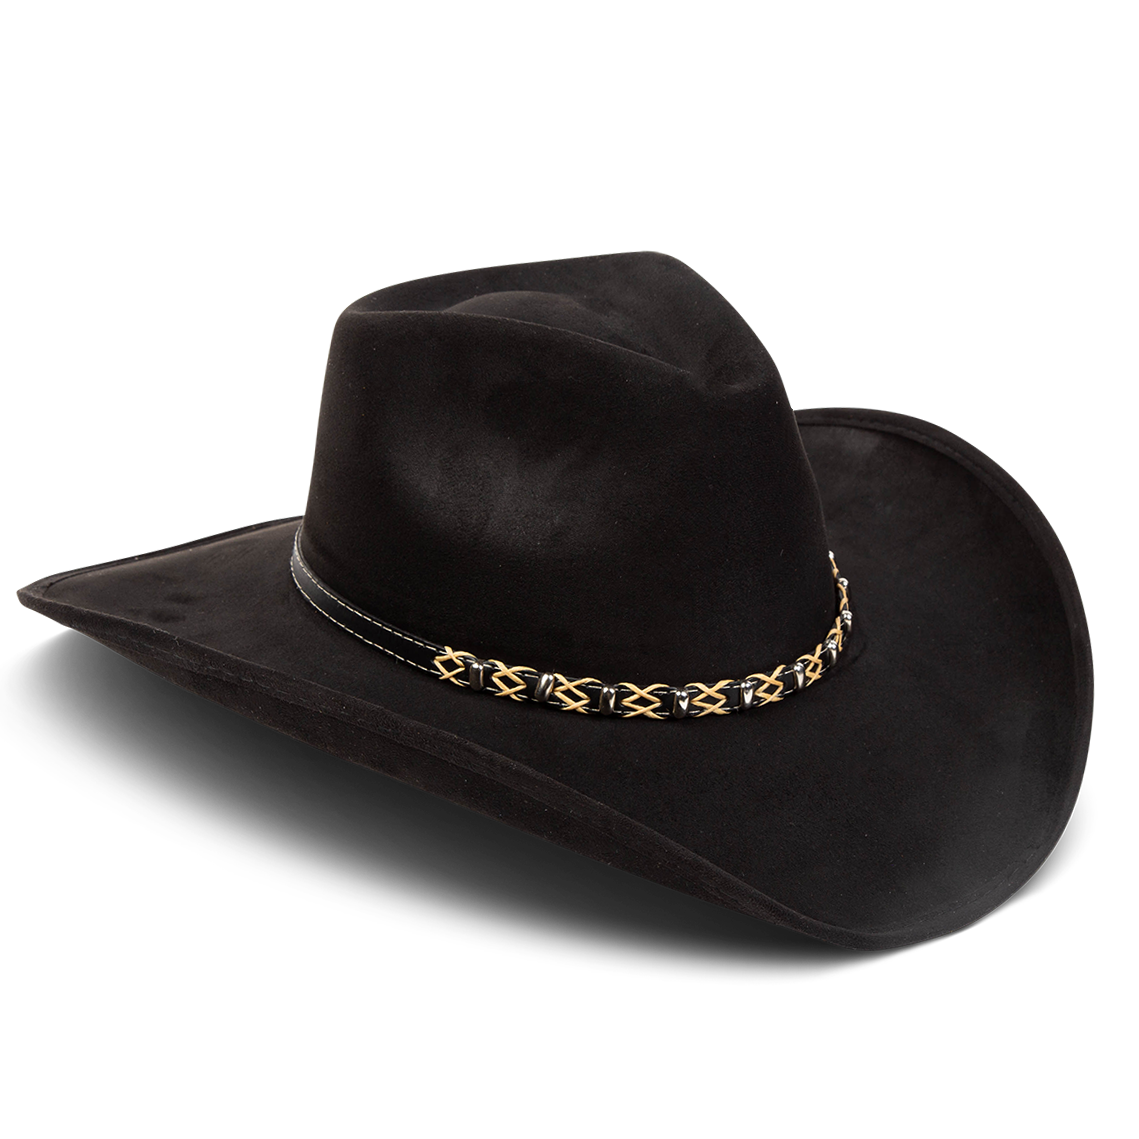 Jones black side view showing upturned-brim on FREEBIRD western cowboy hat featuring teardrop crown and braided leather band